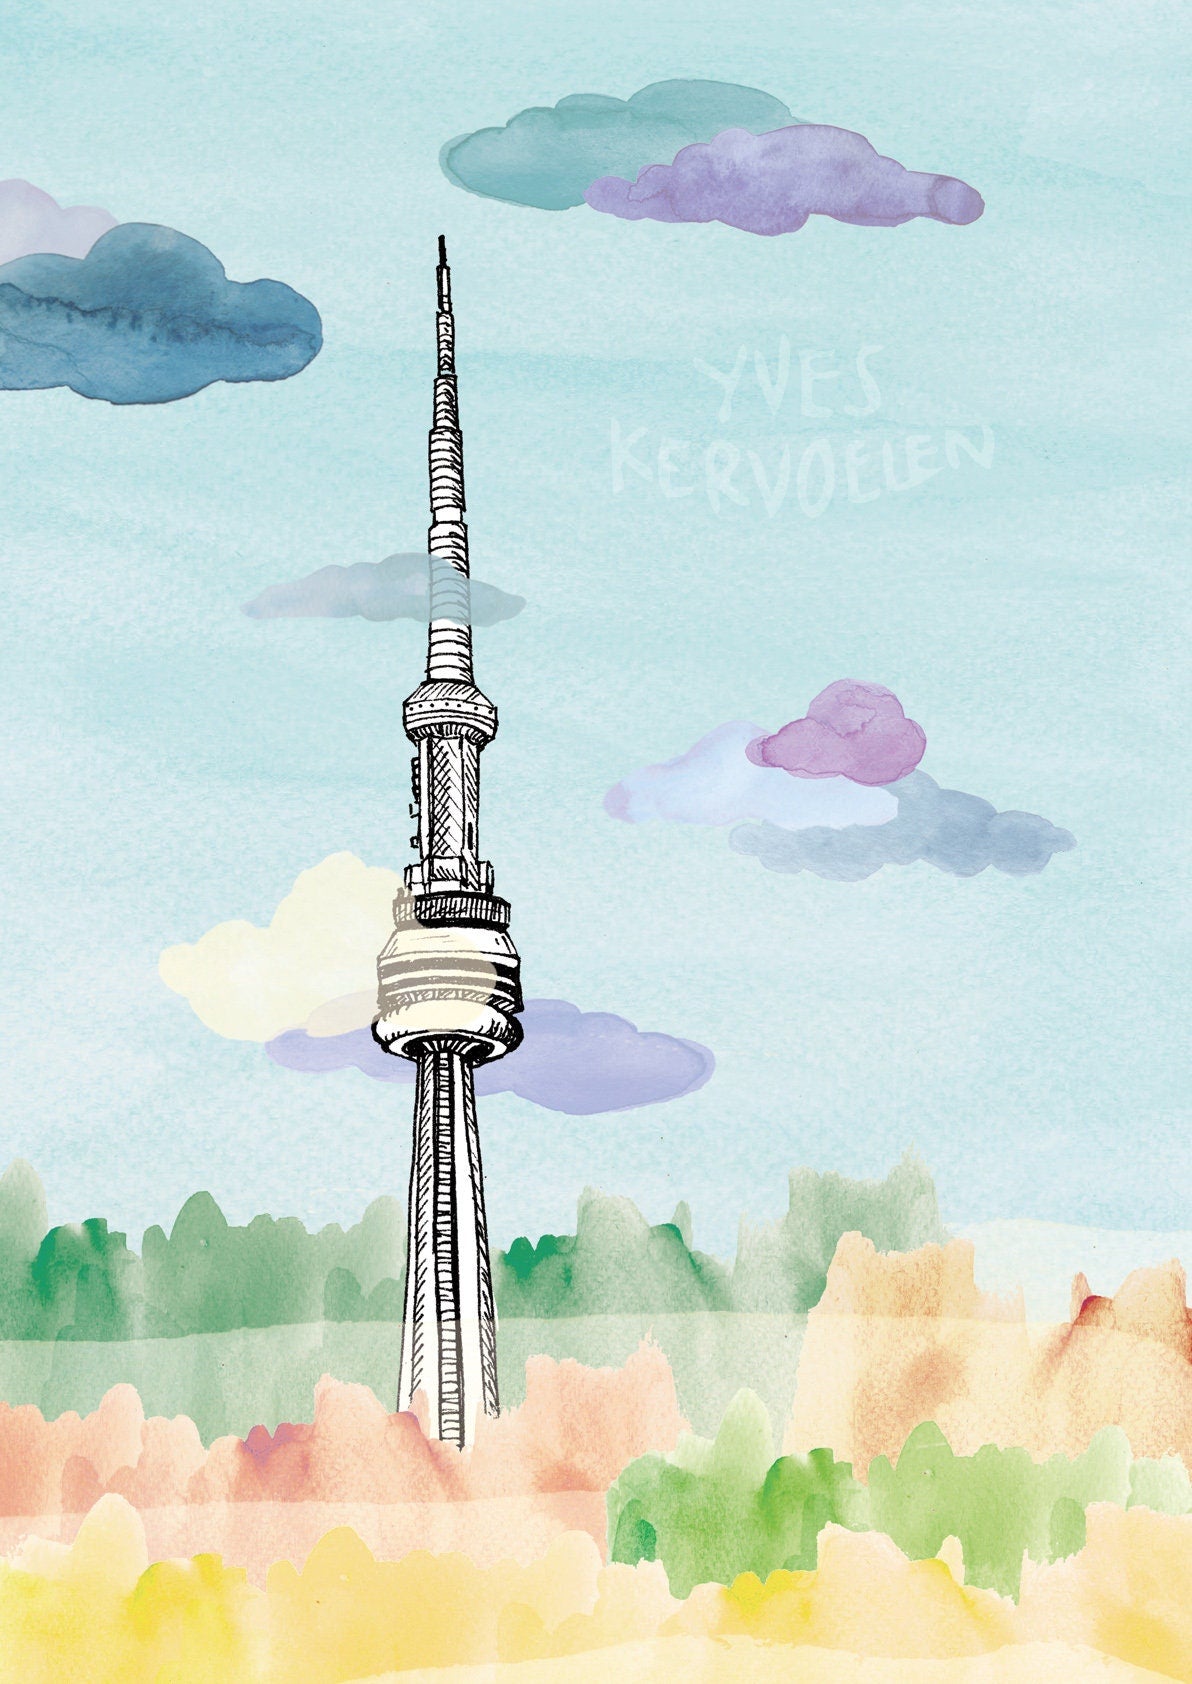 Poster of Toronto's Tower // Canada // A4 or 8x10 Inches // Architecture, Art.